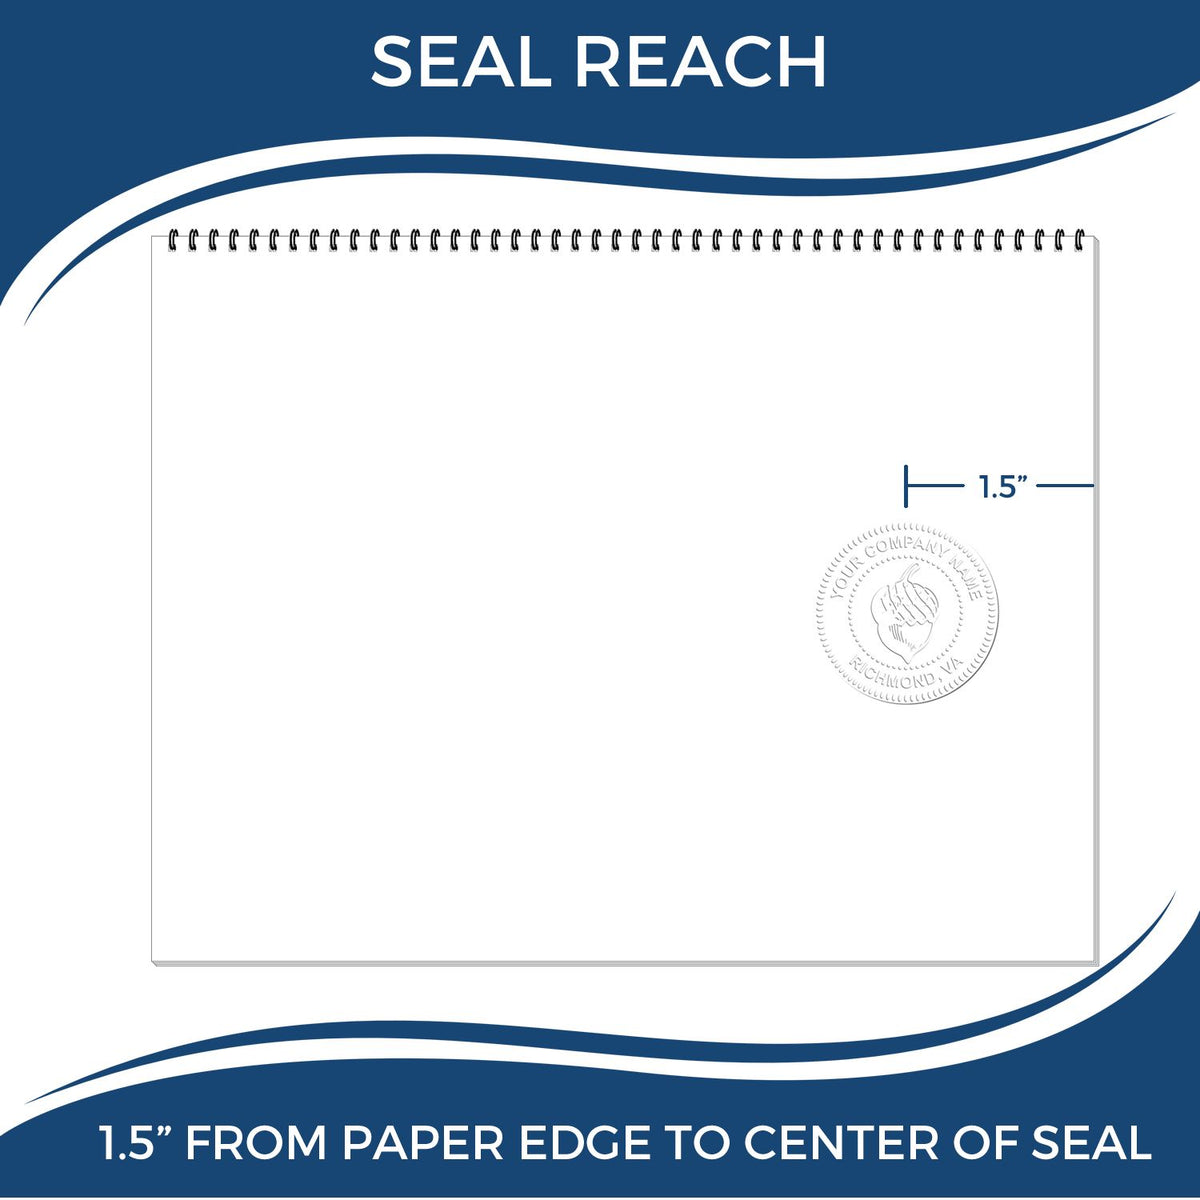 An infographic showing the seal reach which is represented by a ruler and a miniature seal image of the Hybrid Hawaii Land Surveyor Seal